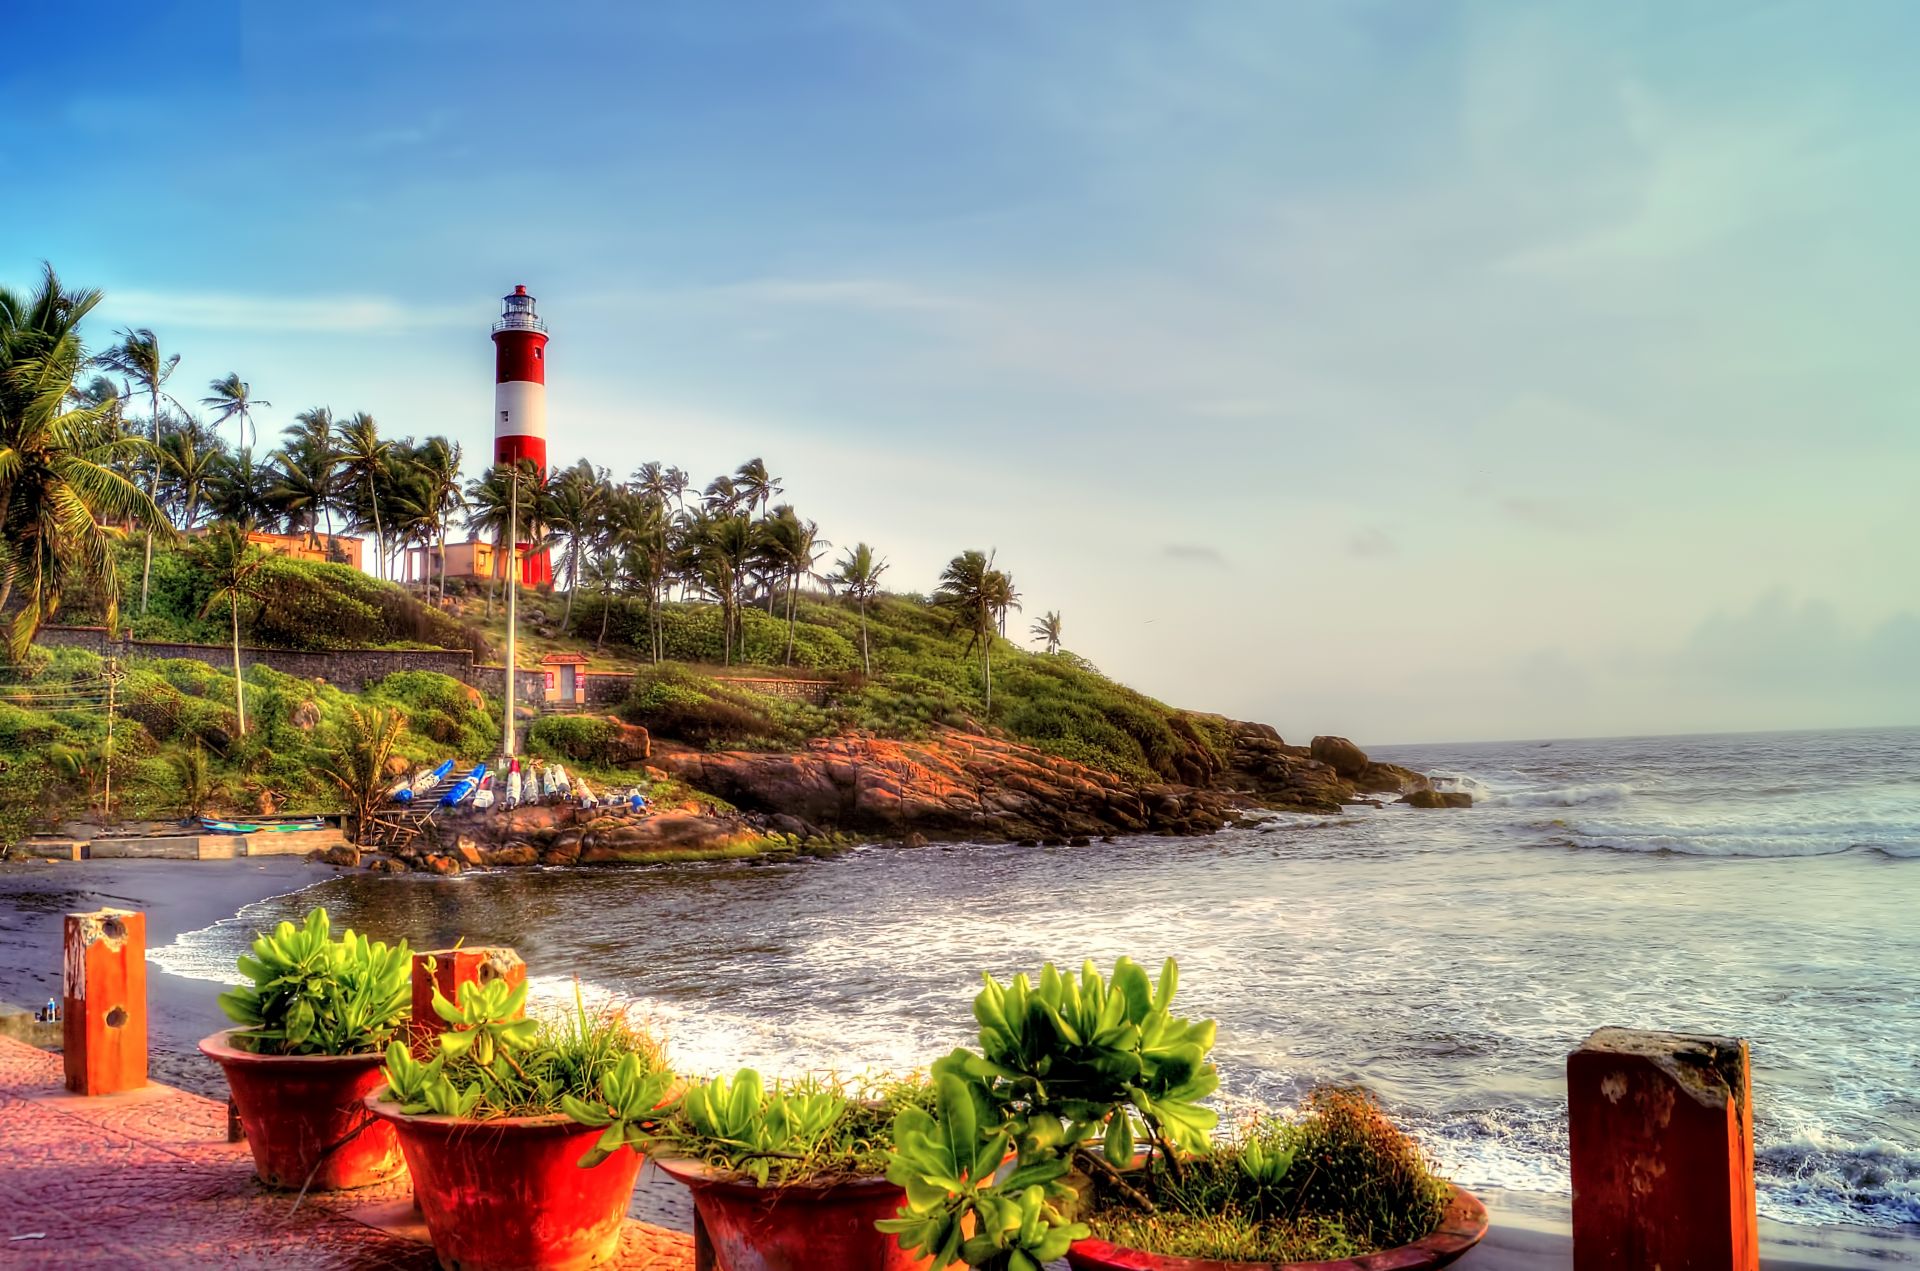 The picturesque location of the lighthouse on the popular Kovalam beach